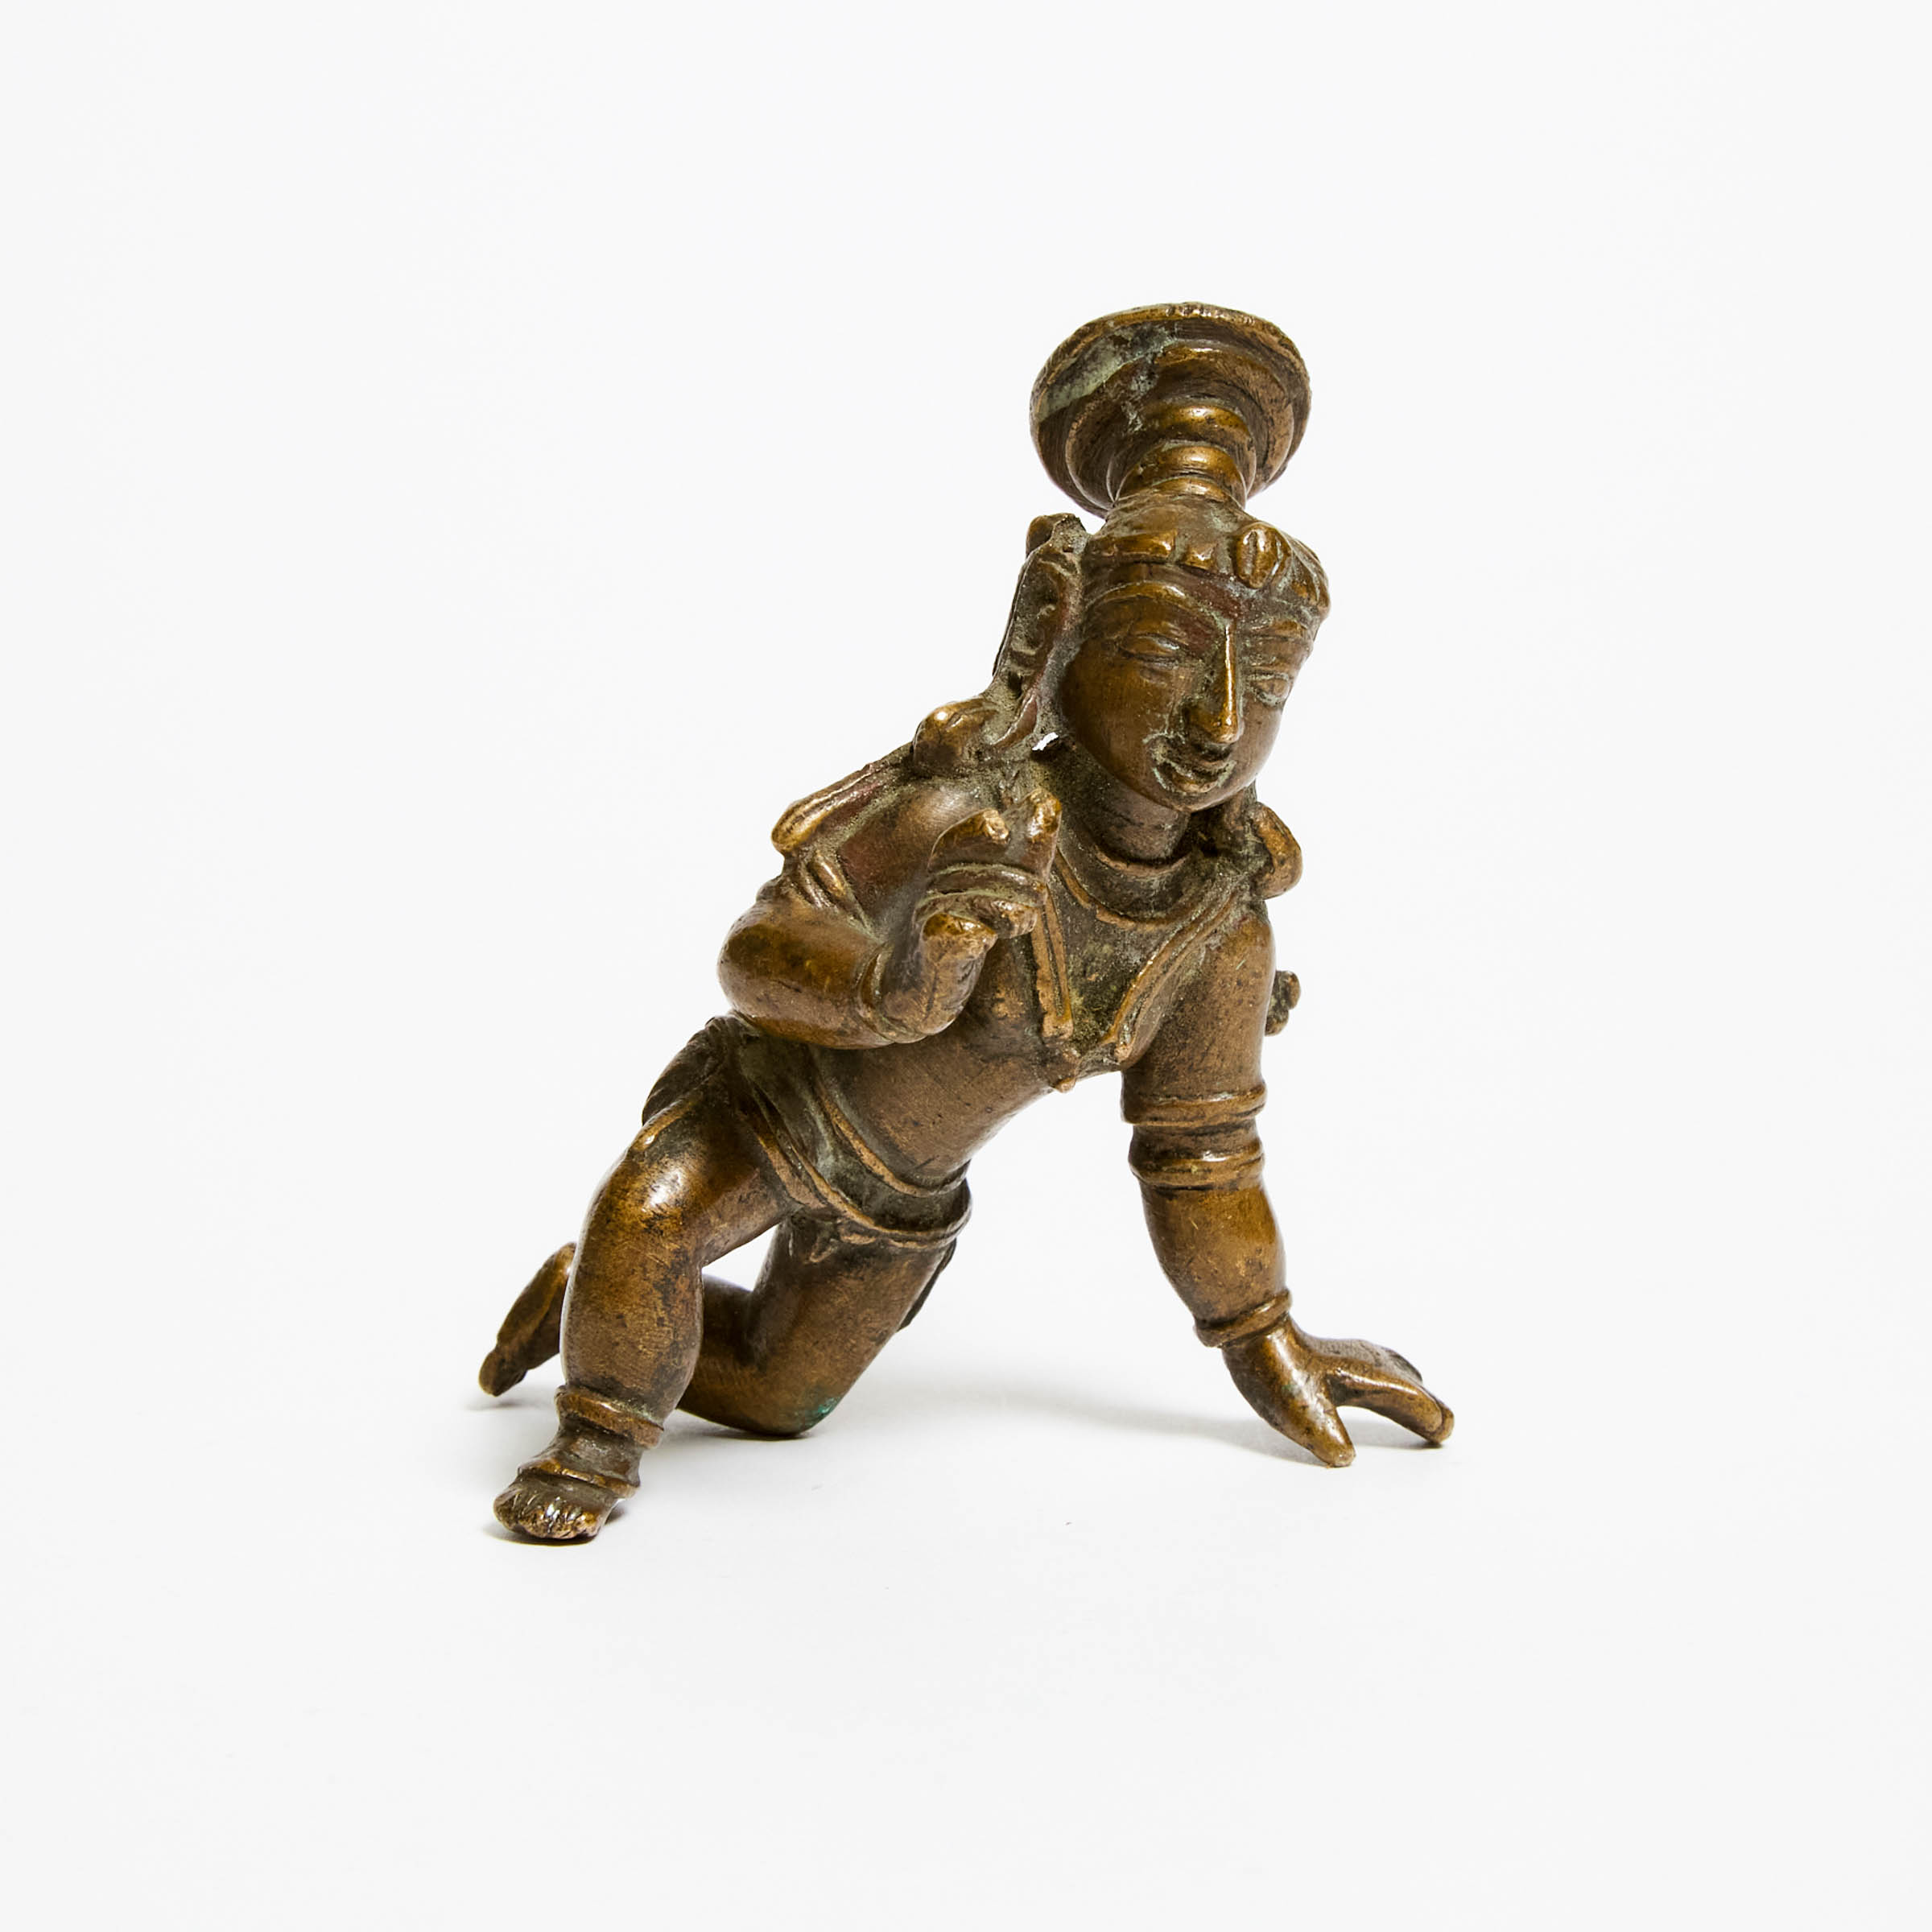 A Copper Alloy Figure of Infant Krishna, 19th Century or Earlier